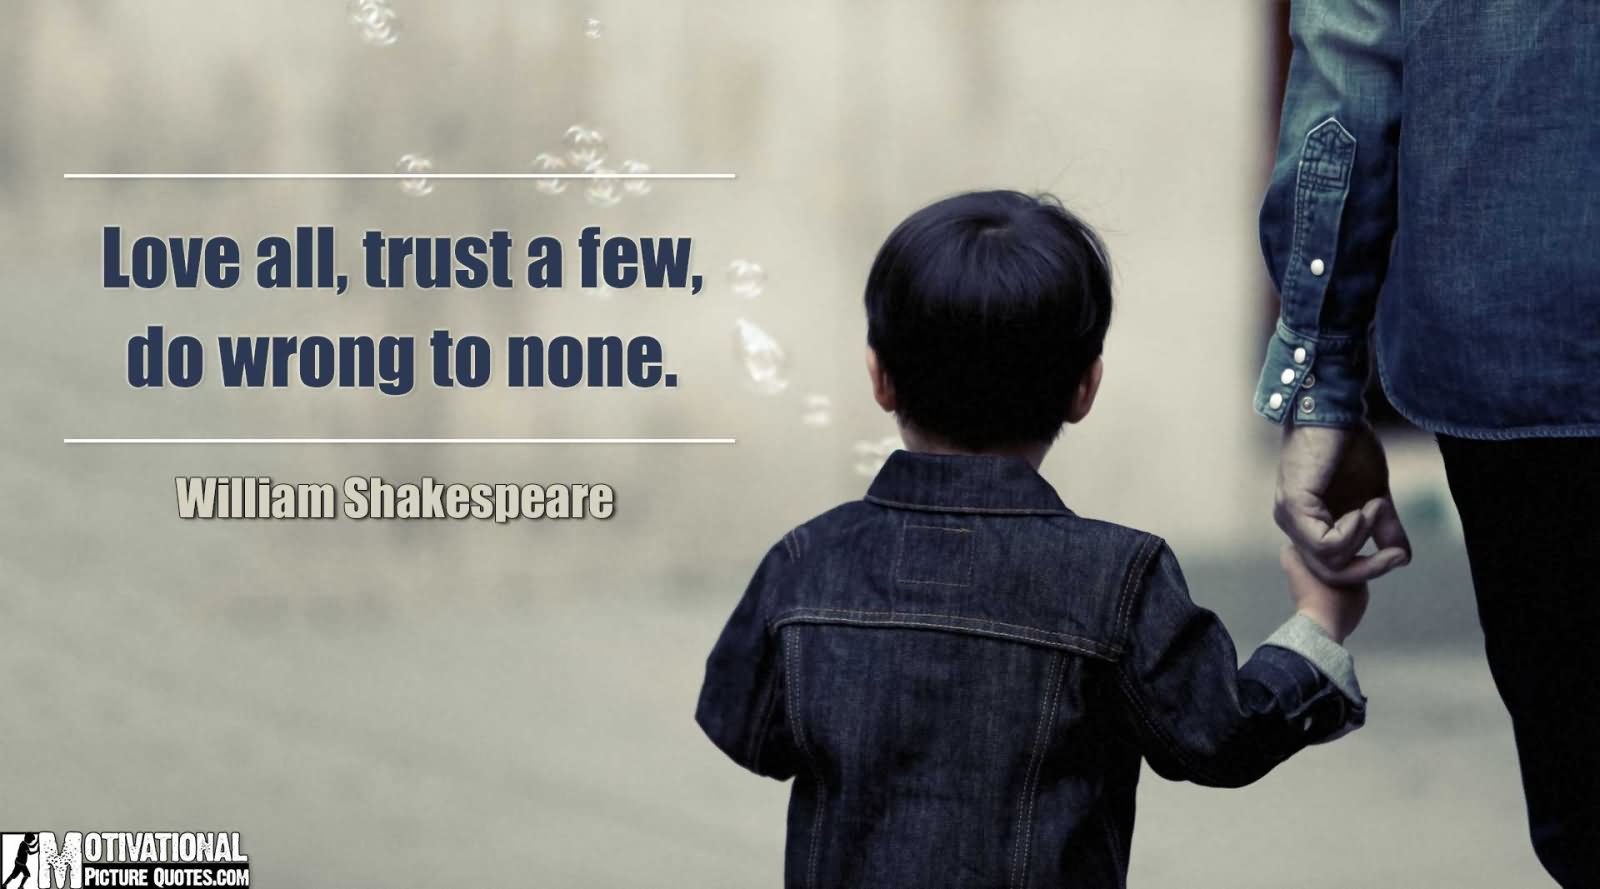 Love all Trust a few do wrong to none - William Shakespeare